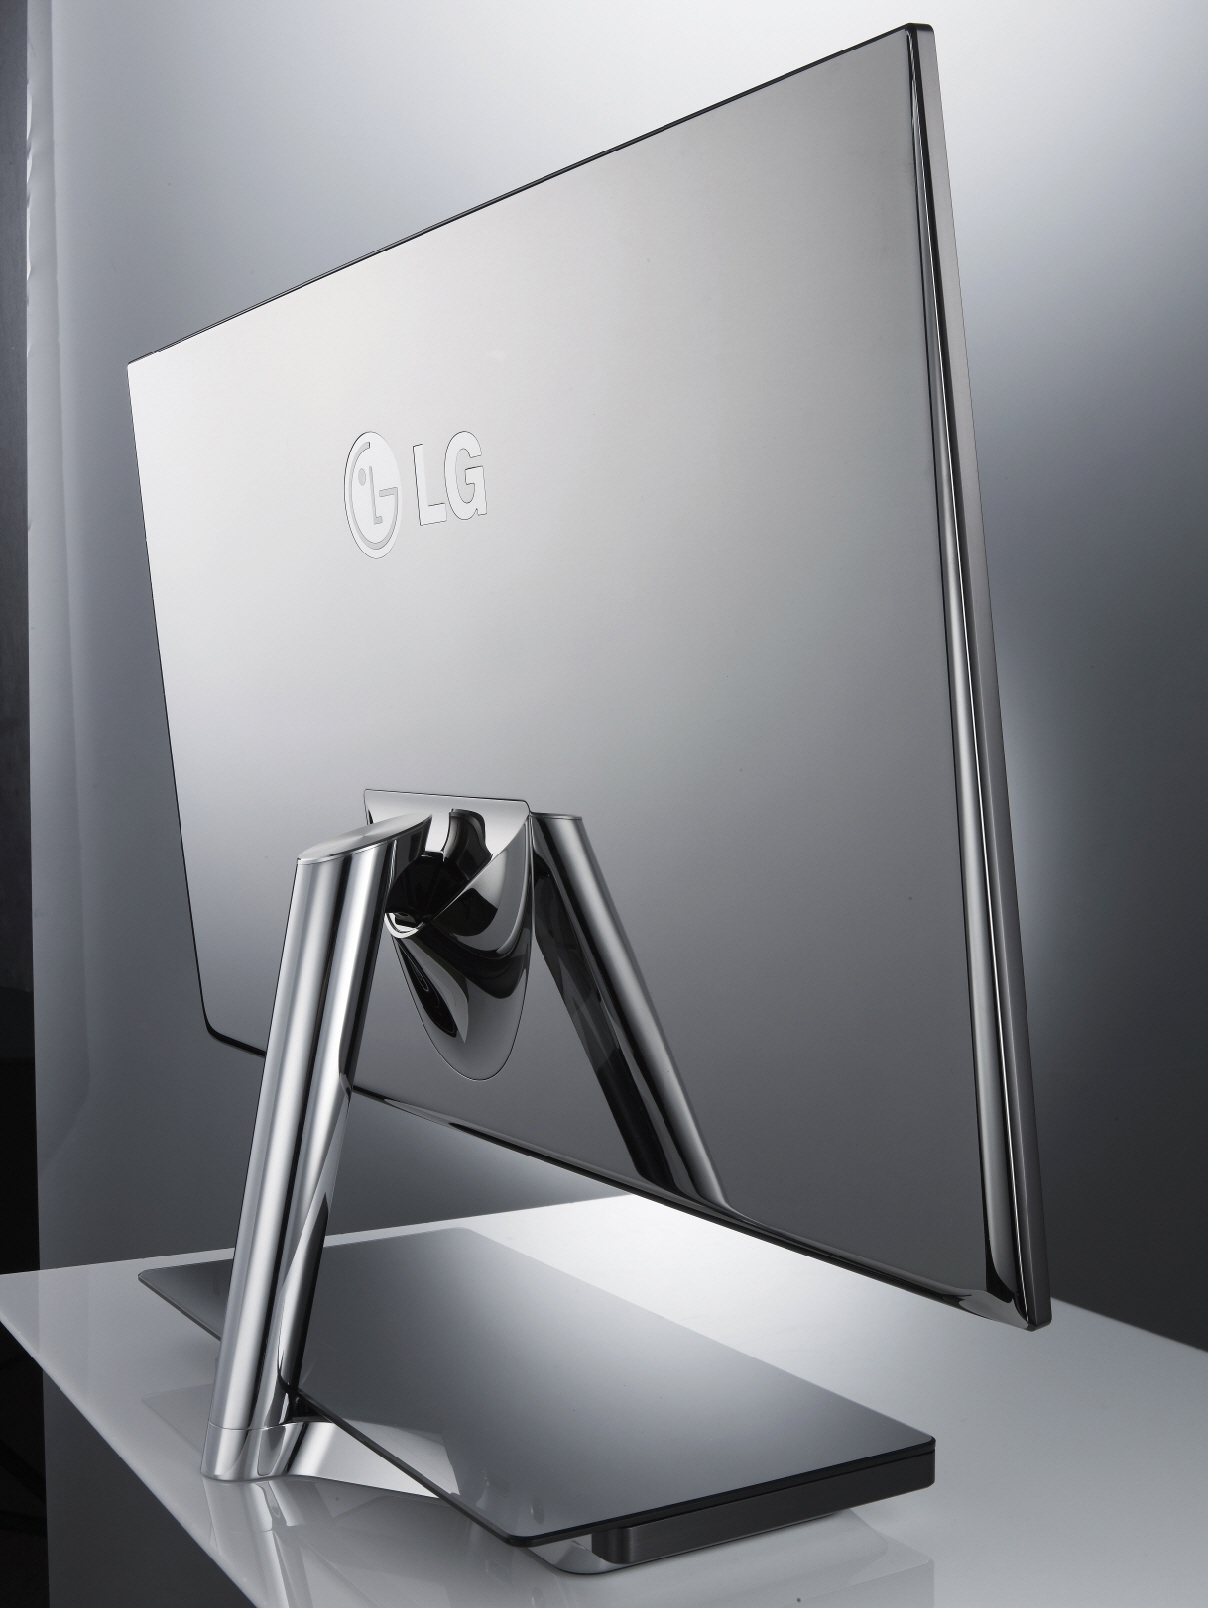 A rear view of LG monitor E2391VR